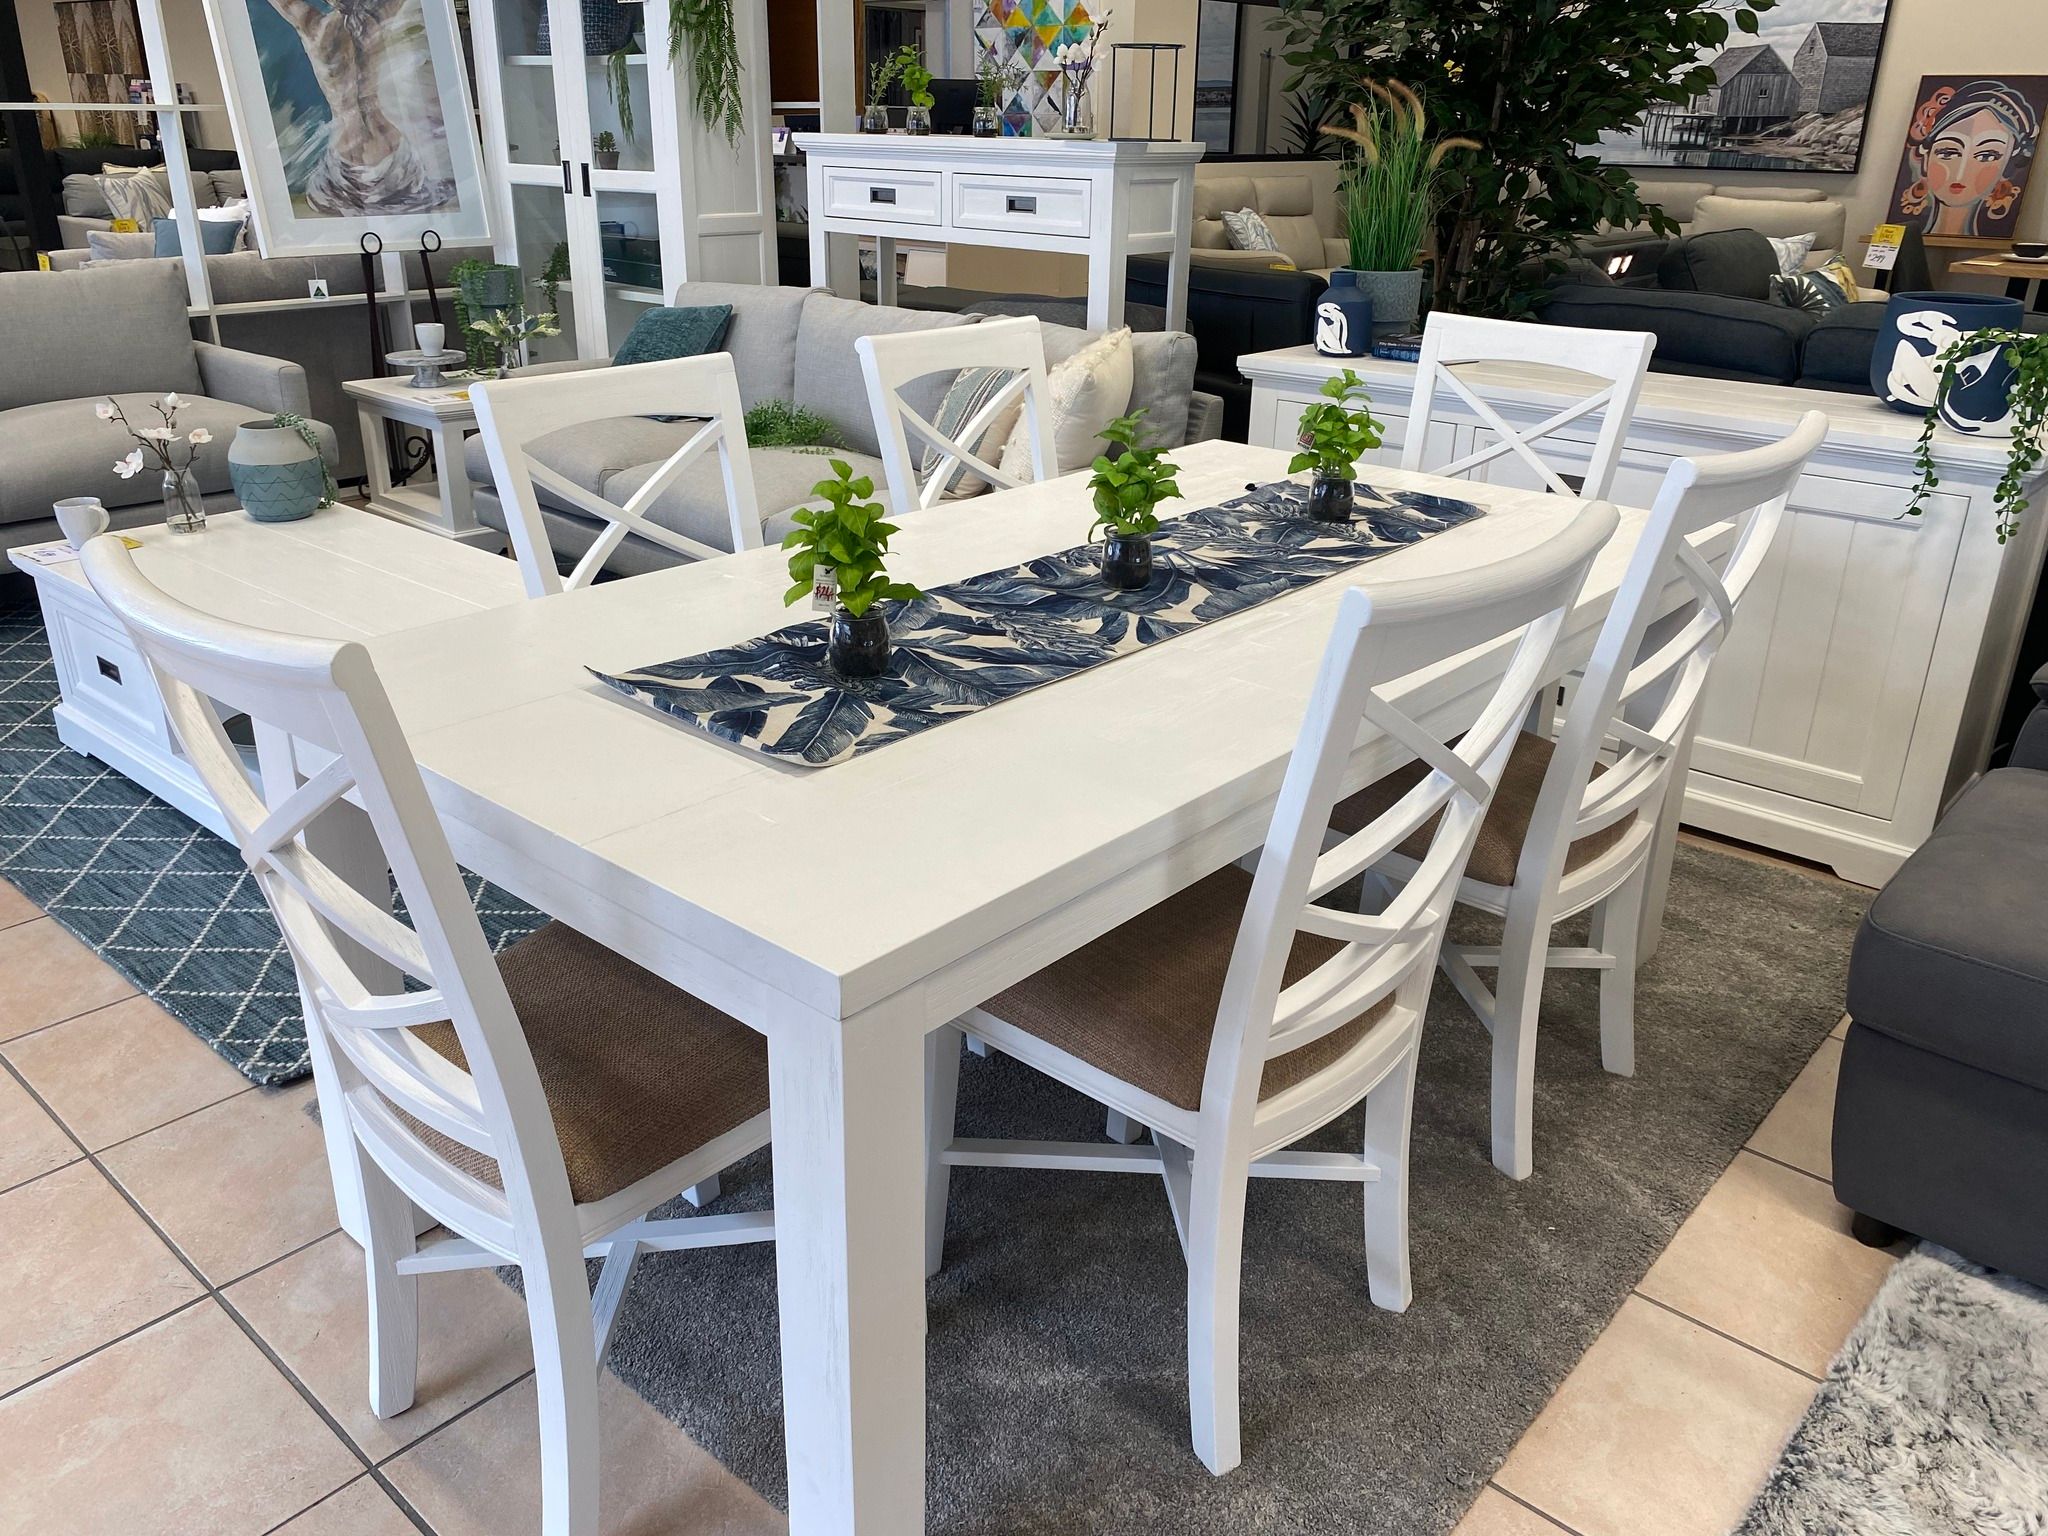 How To Choose Your New Dining Room Furniture ?